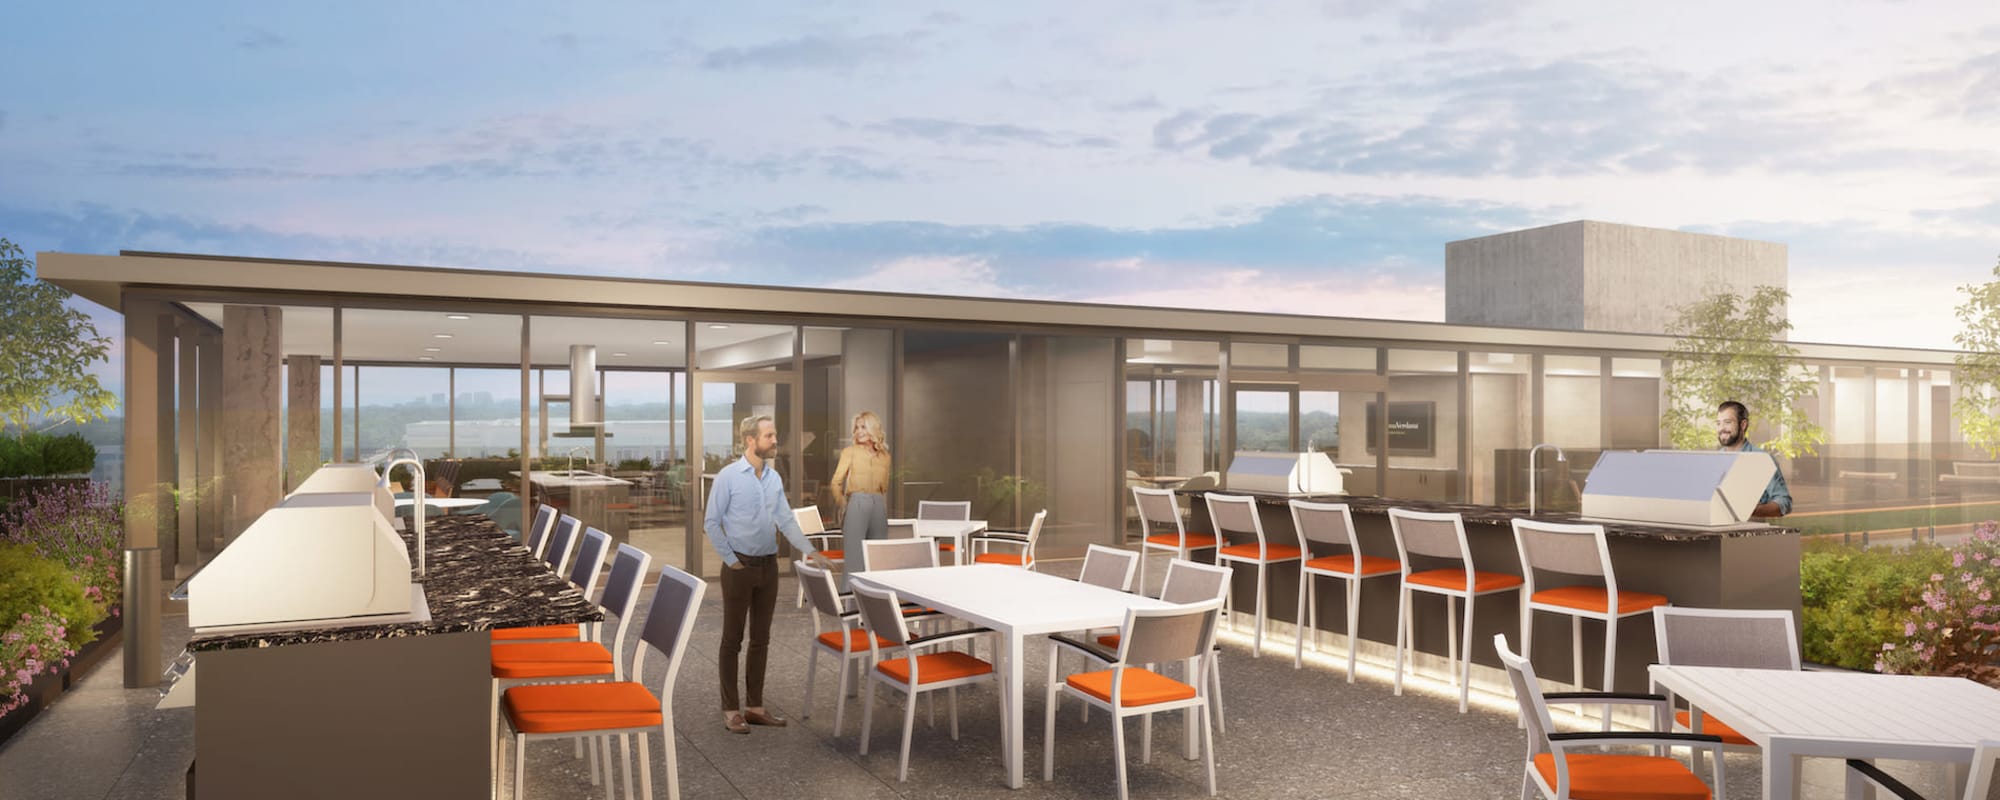 Deck top seating with orange chairs at Optima Verdana™ in Wilmette, Illinois